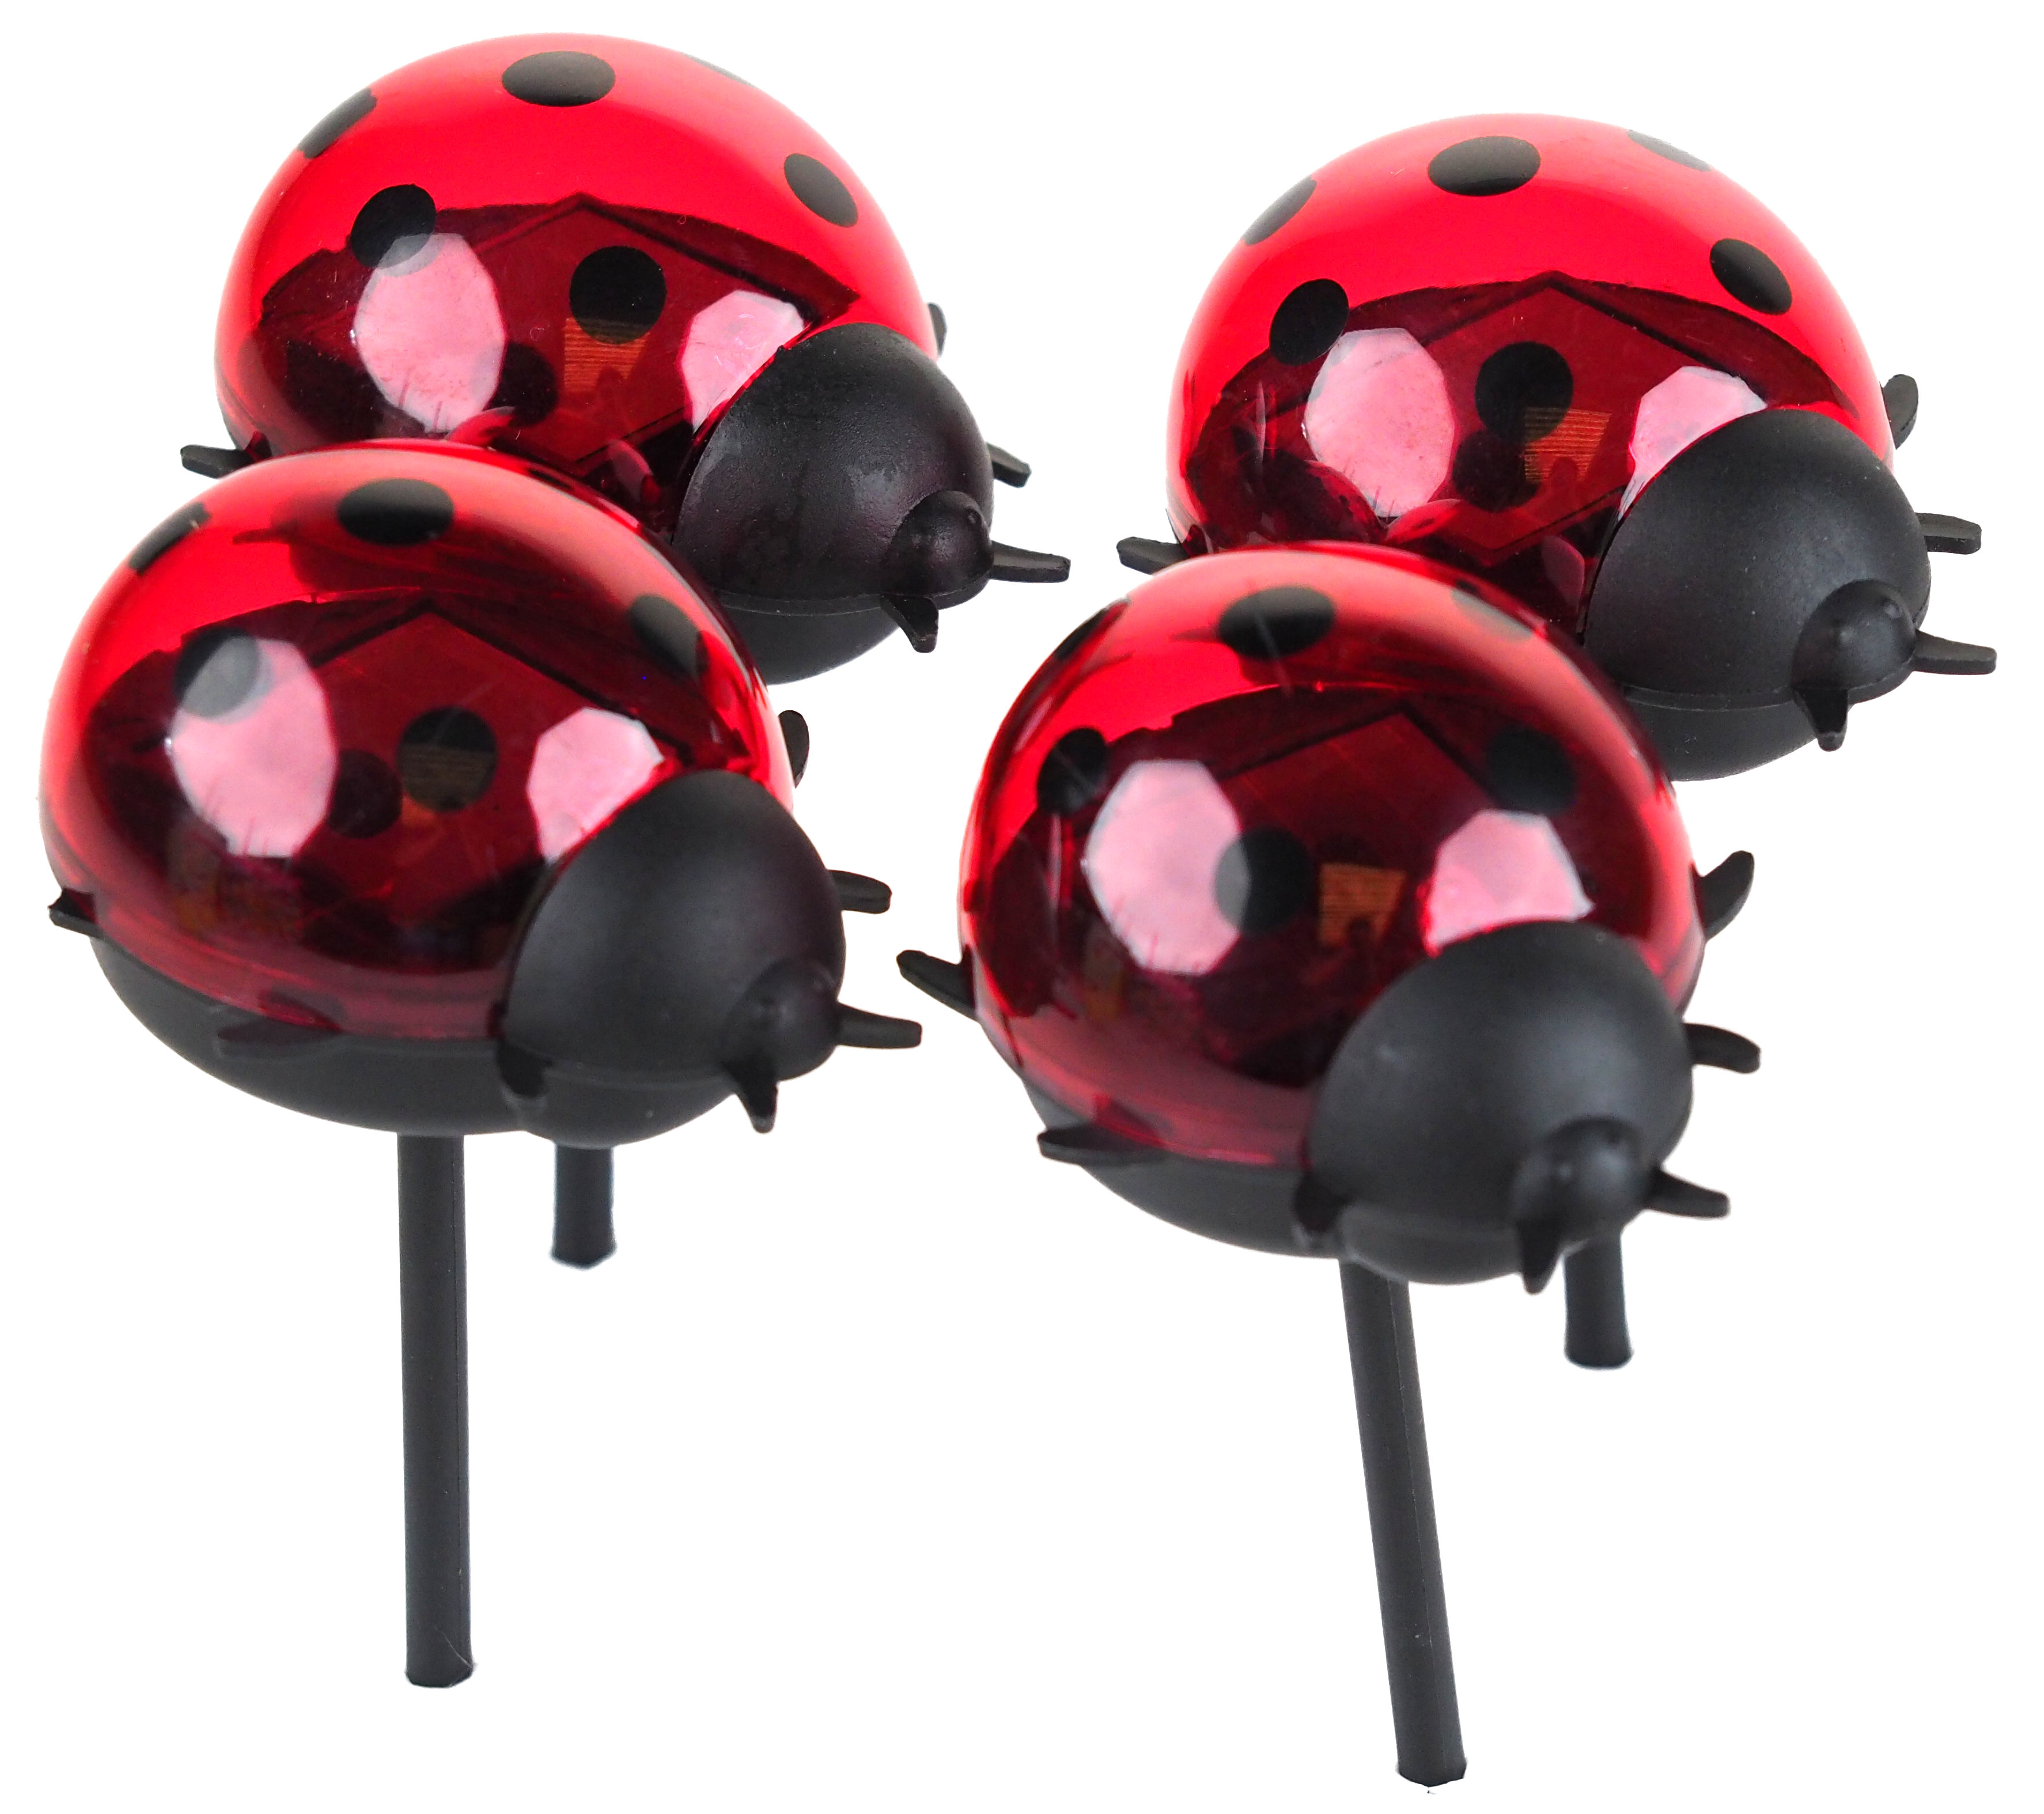 Ladybird Garden Solar Lights On Stake - Ideal For pots or pathway - Set of 4